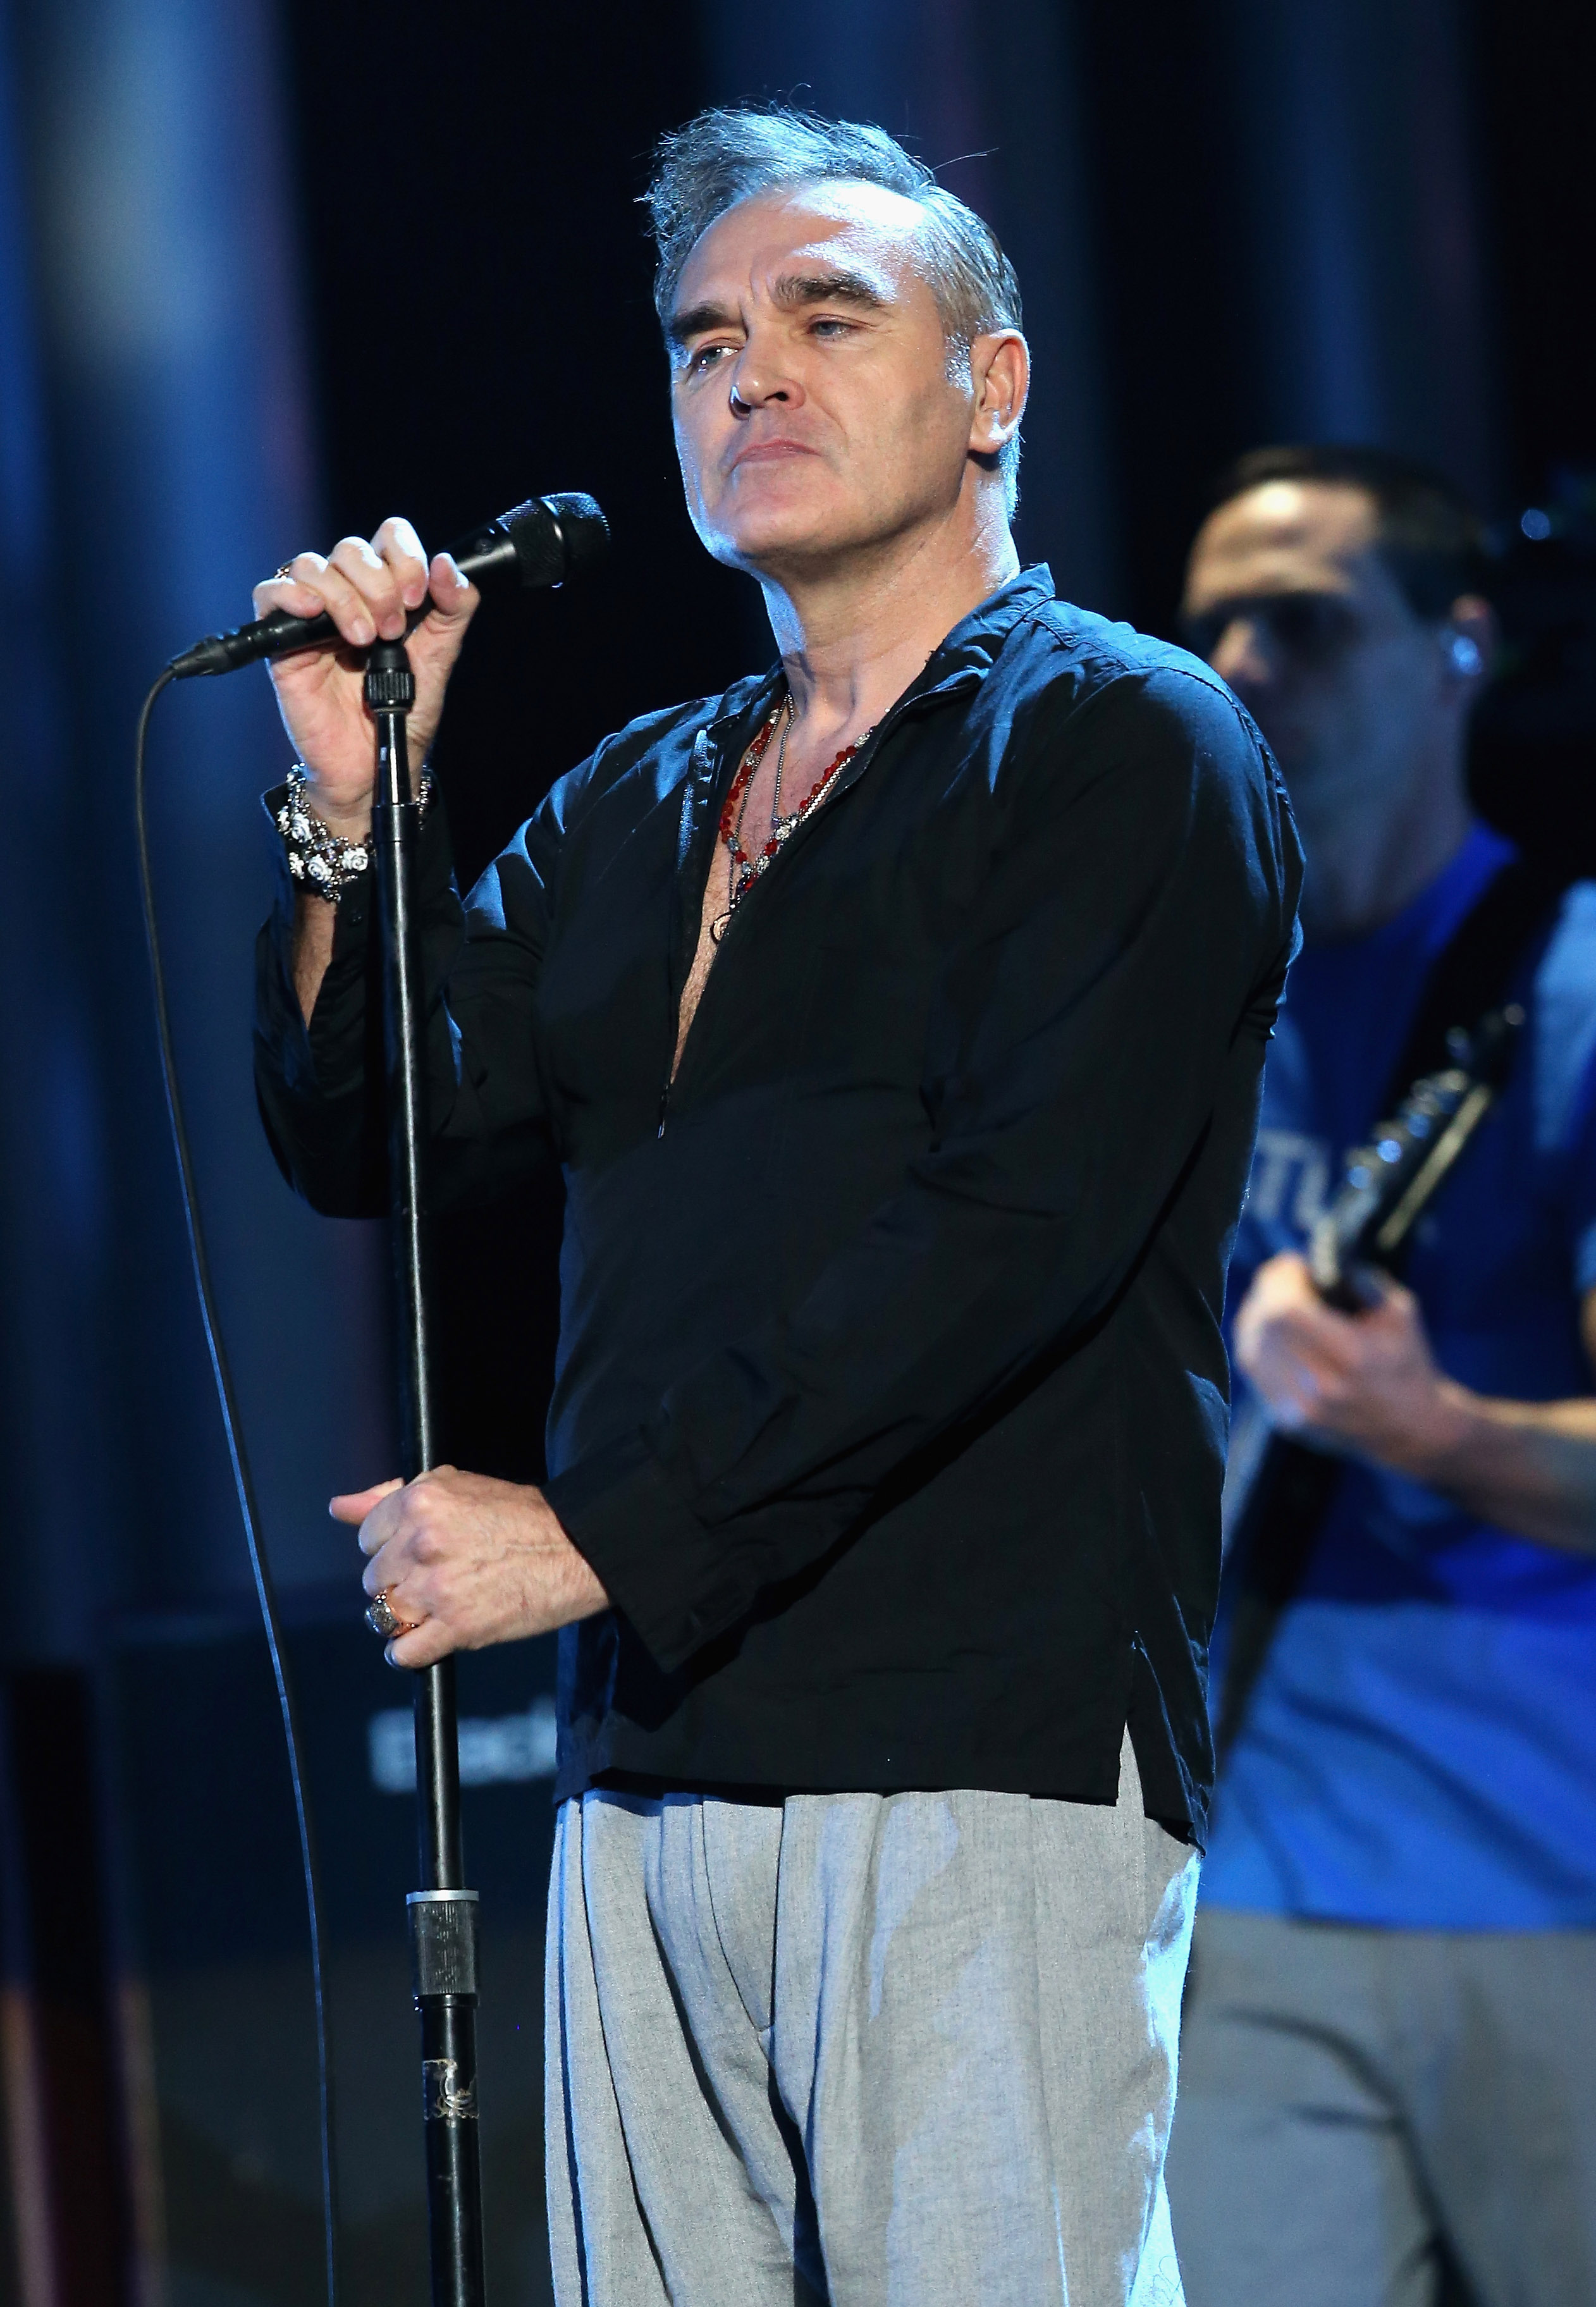 Singer Morrissey performs on stage during the 20th annual Nobel Peace Prize Concert at the Oslo Spektrum on Dec. 11, 2013 in Oslo. (Chris Jackson—Getty Images)